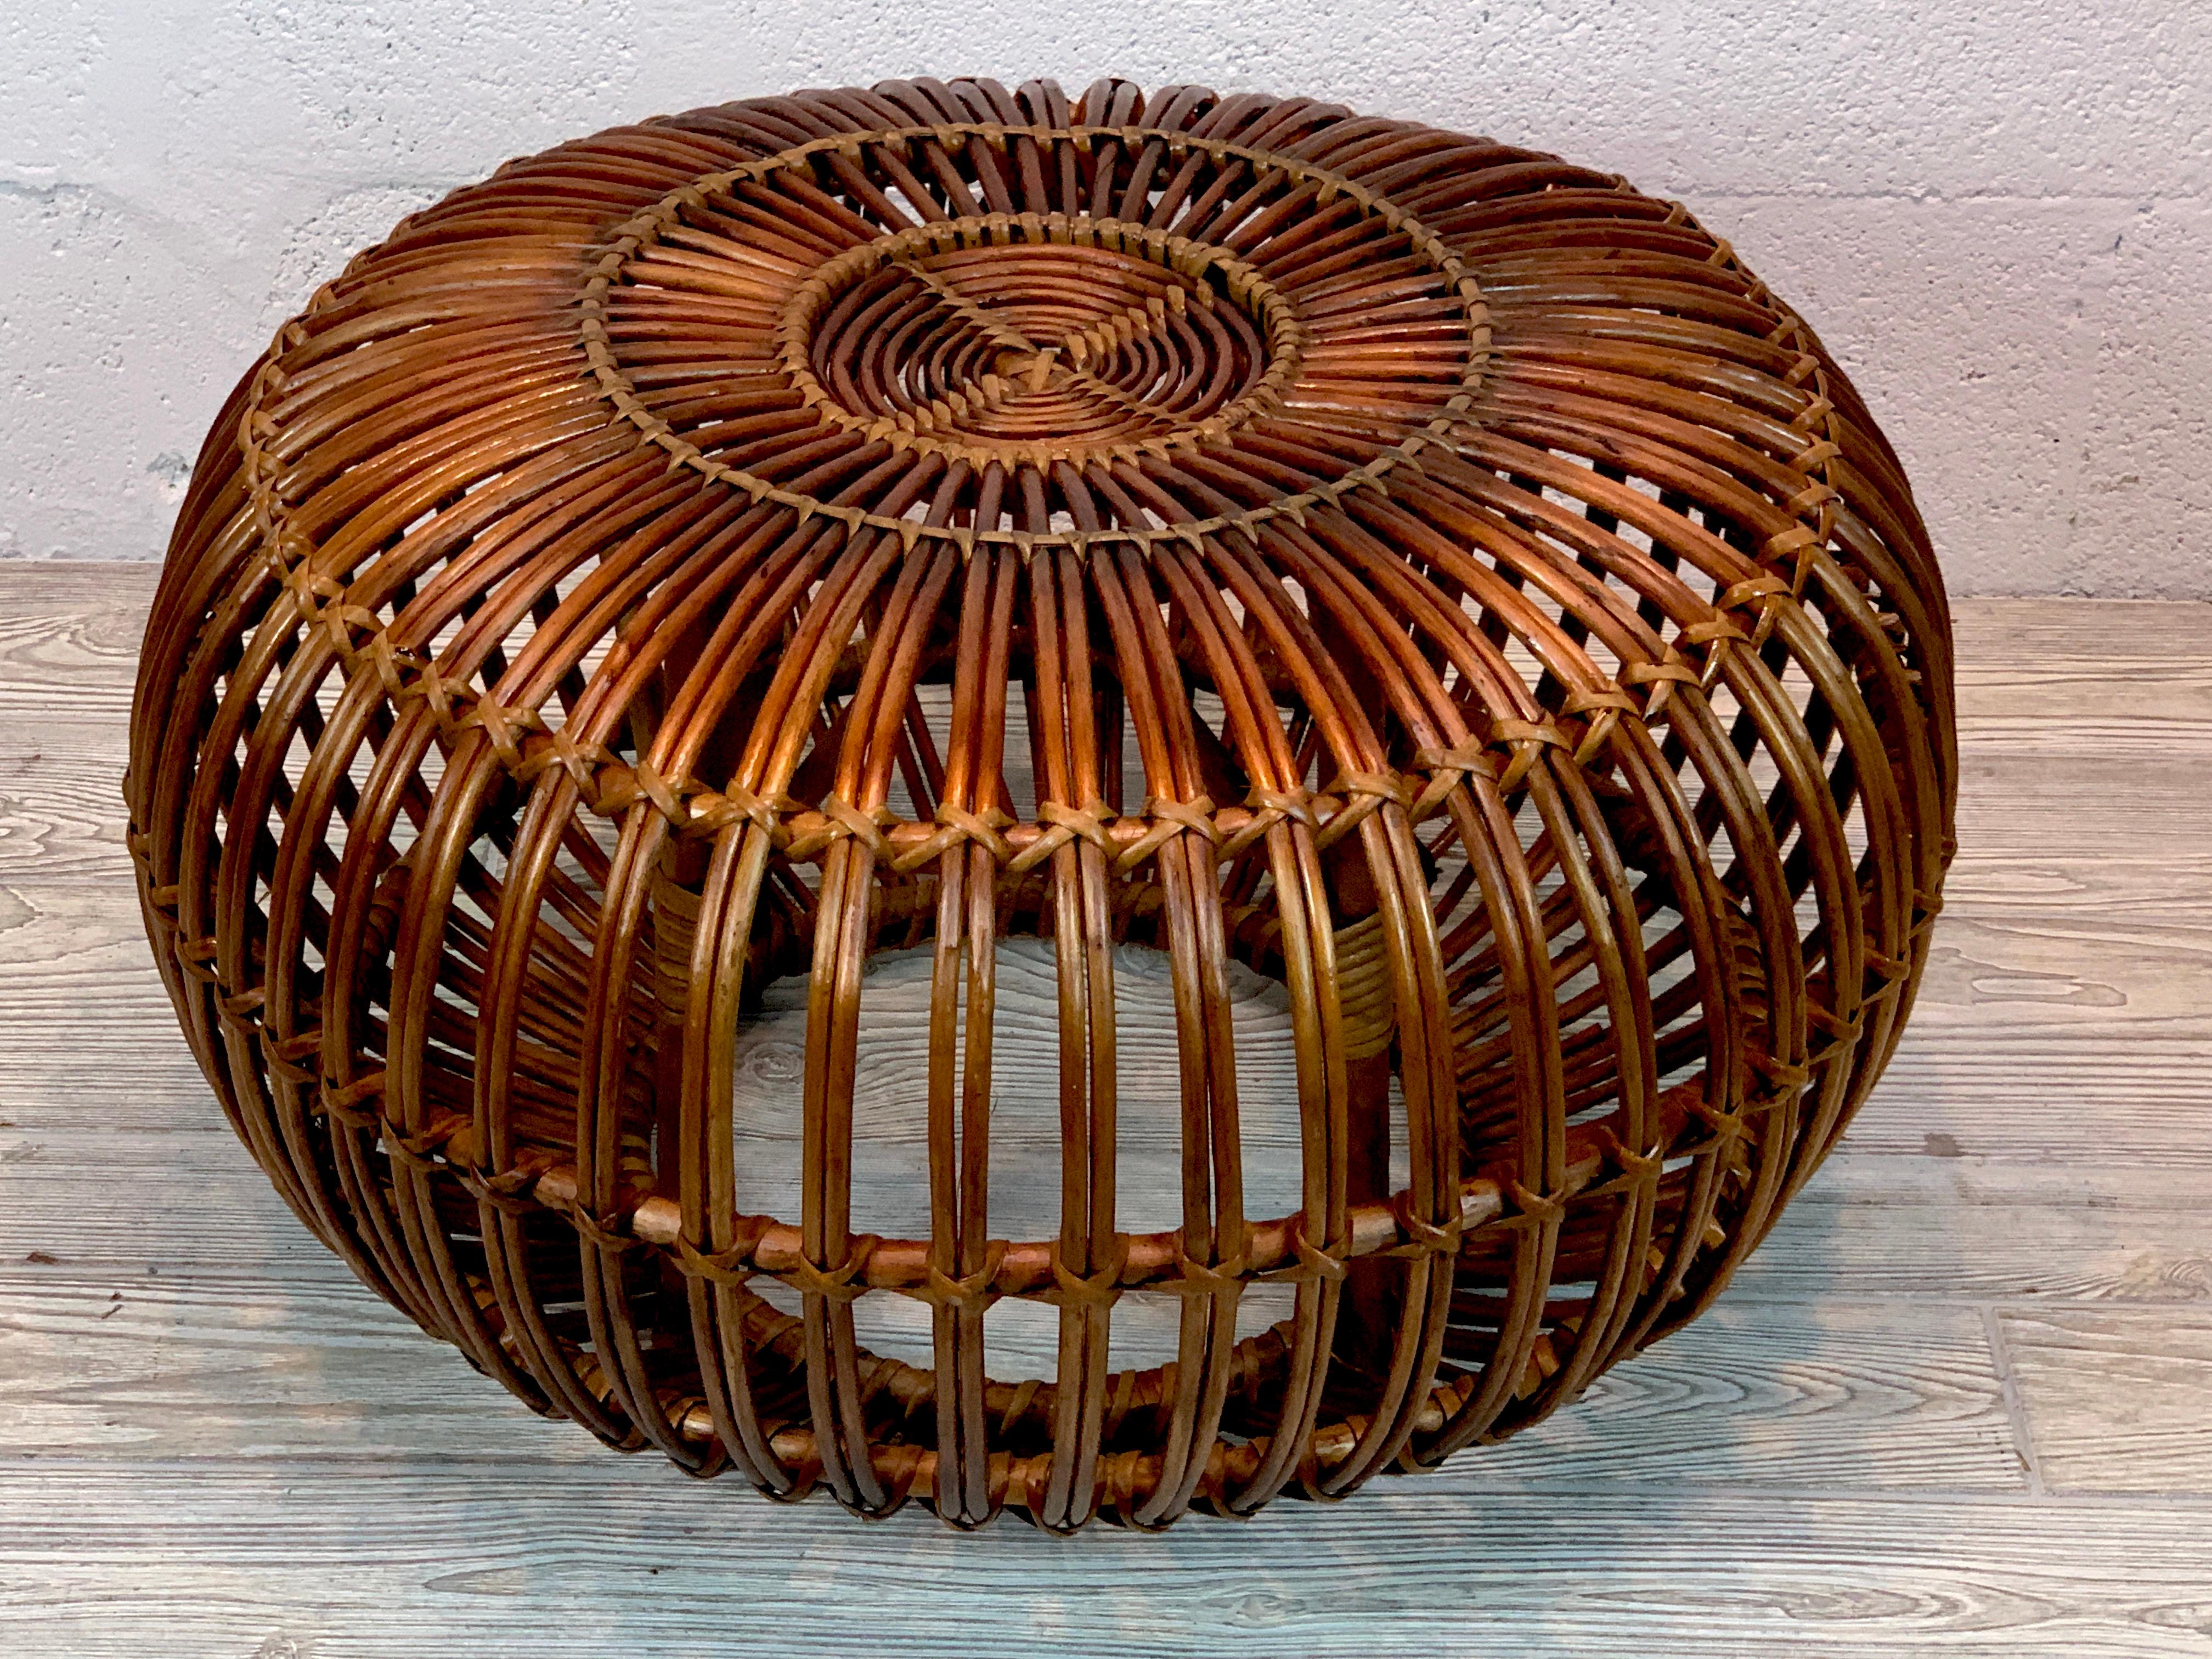 Mid-20th century woven rattan ottoman, pouf or stool designed by Italian designer Franco Albini. A fine period example, great color and sturdy. 
  